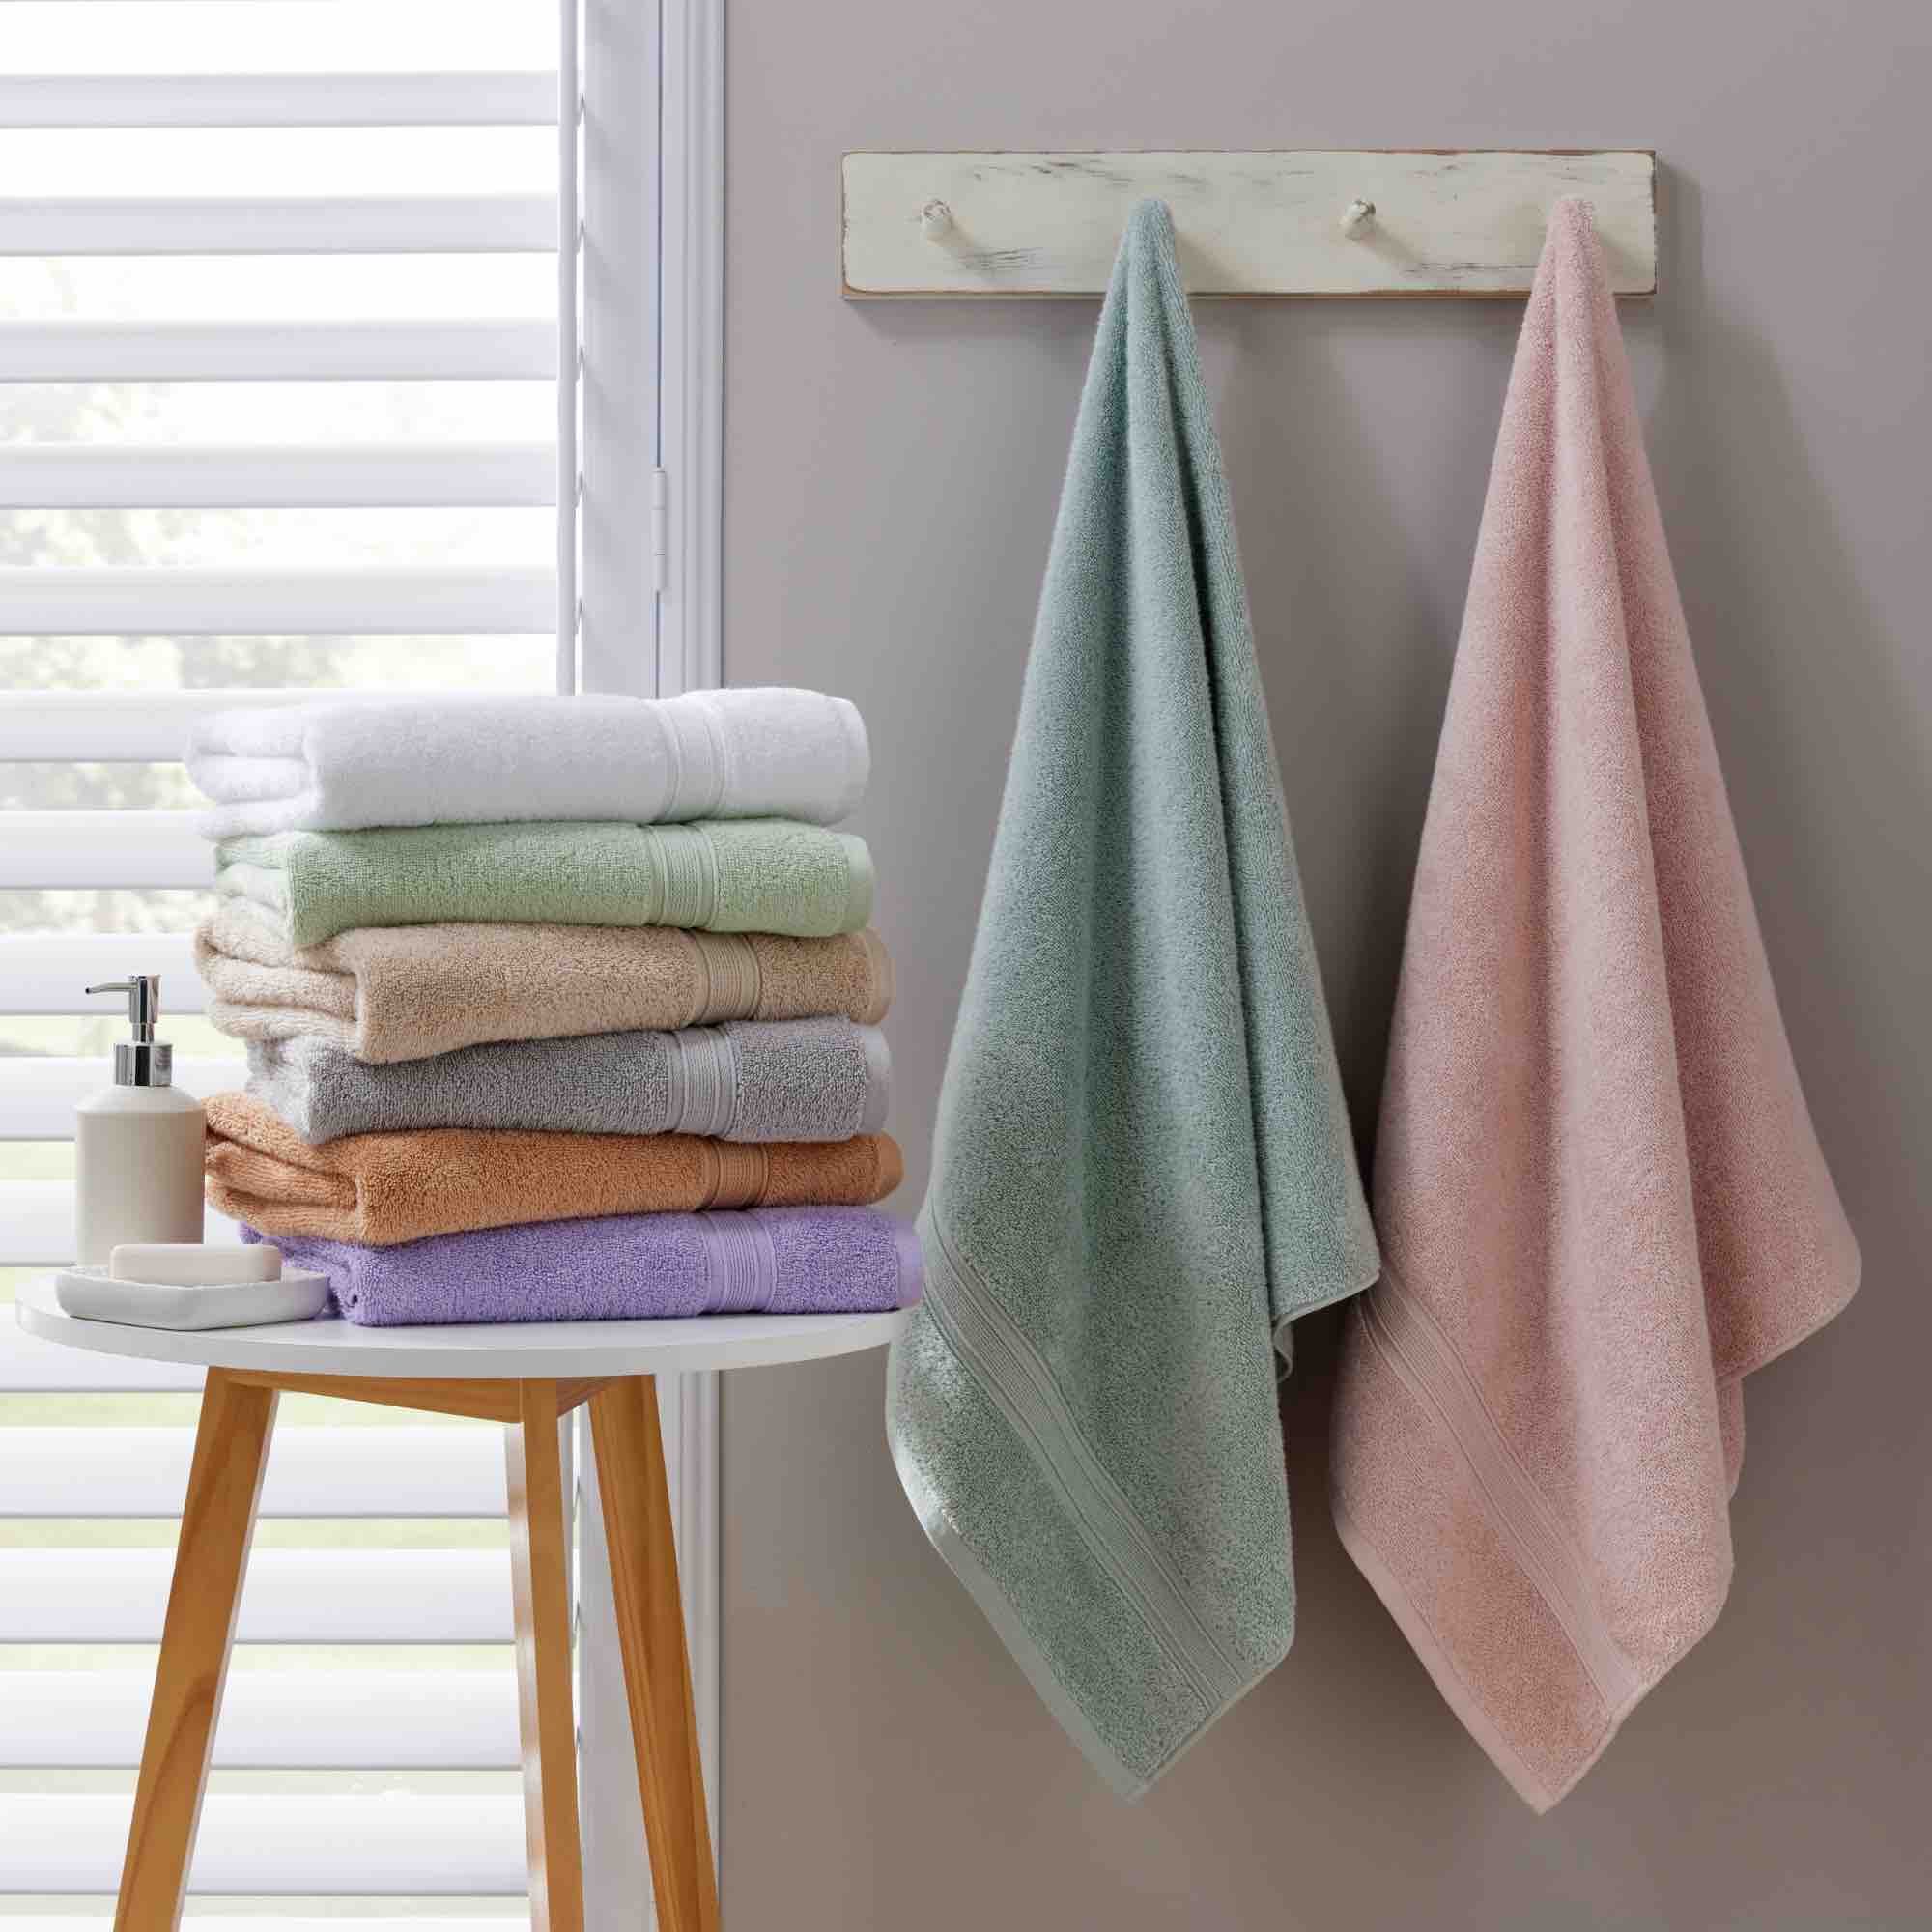 Christy Serene Combed Cotton Towel - White